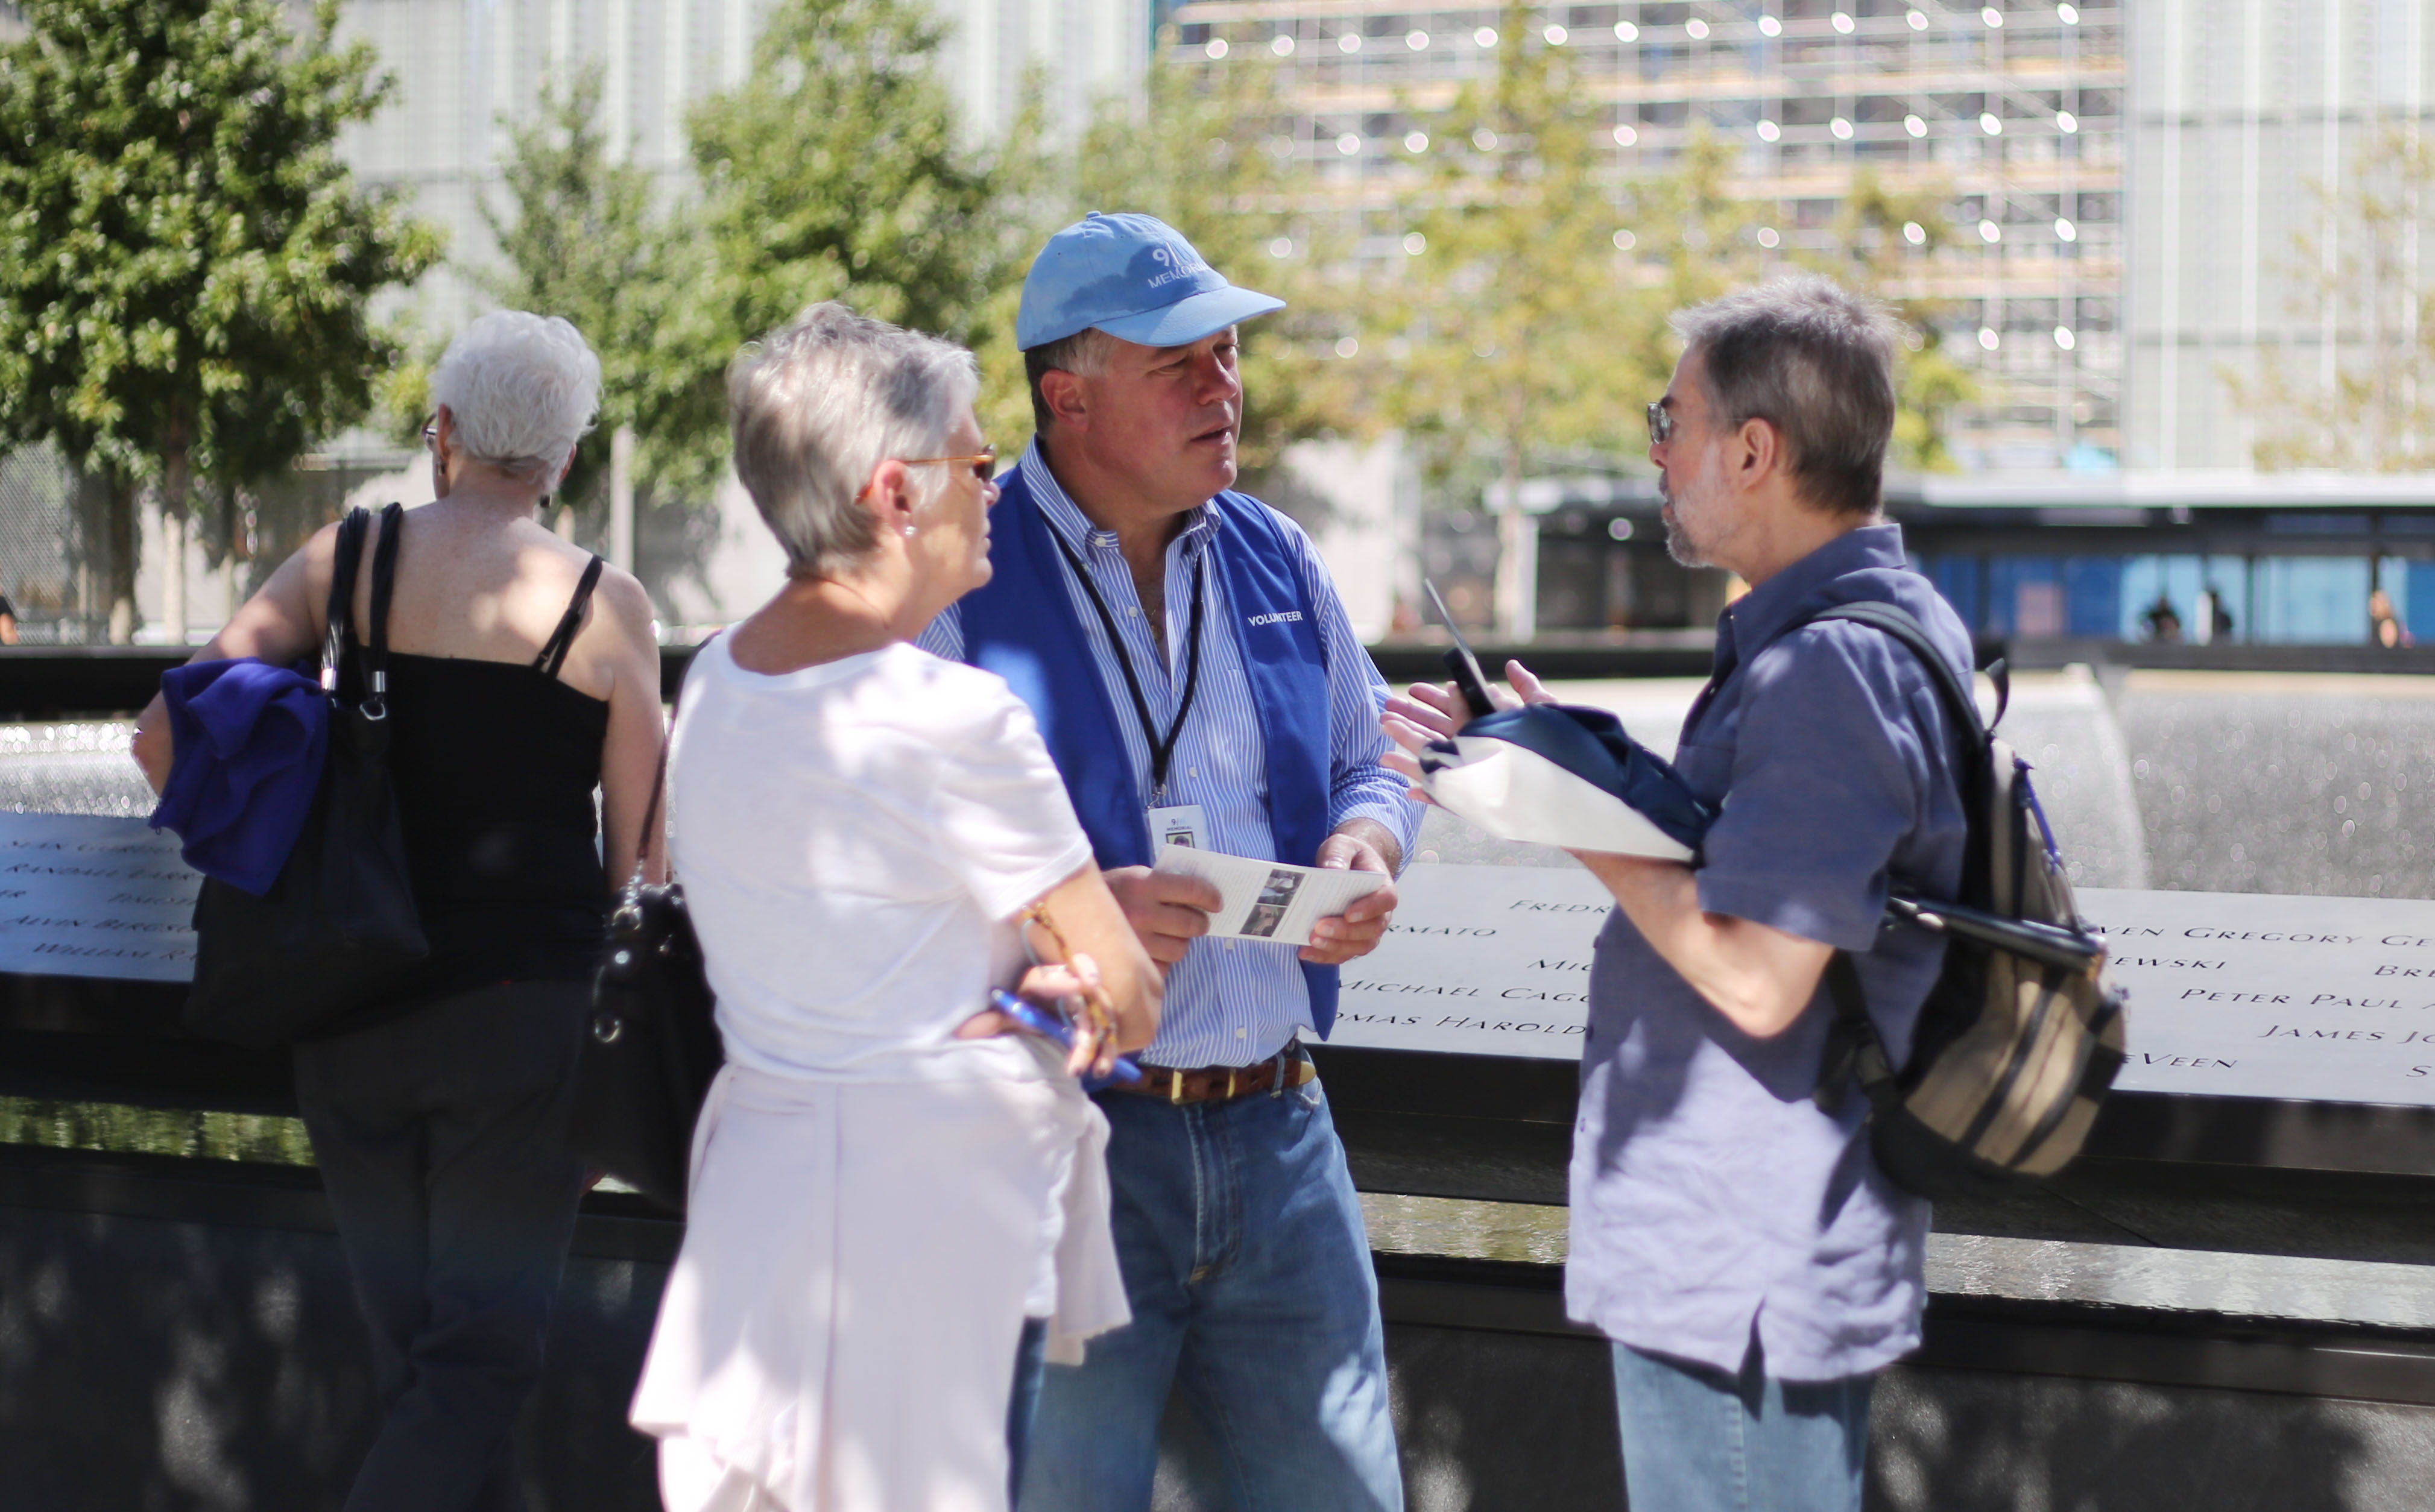 A volunteer speaks with two visitors beside a reflecting pool on the 9/11 Memorial plaza.